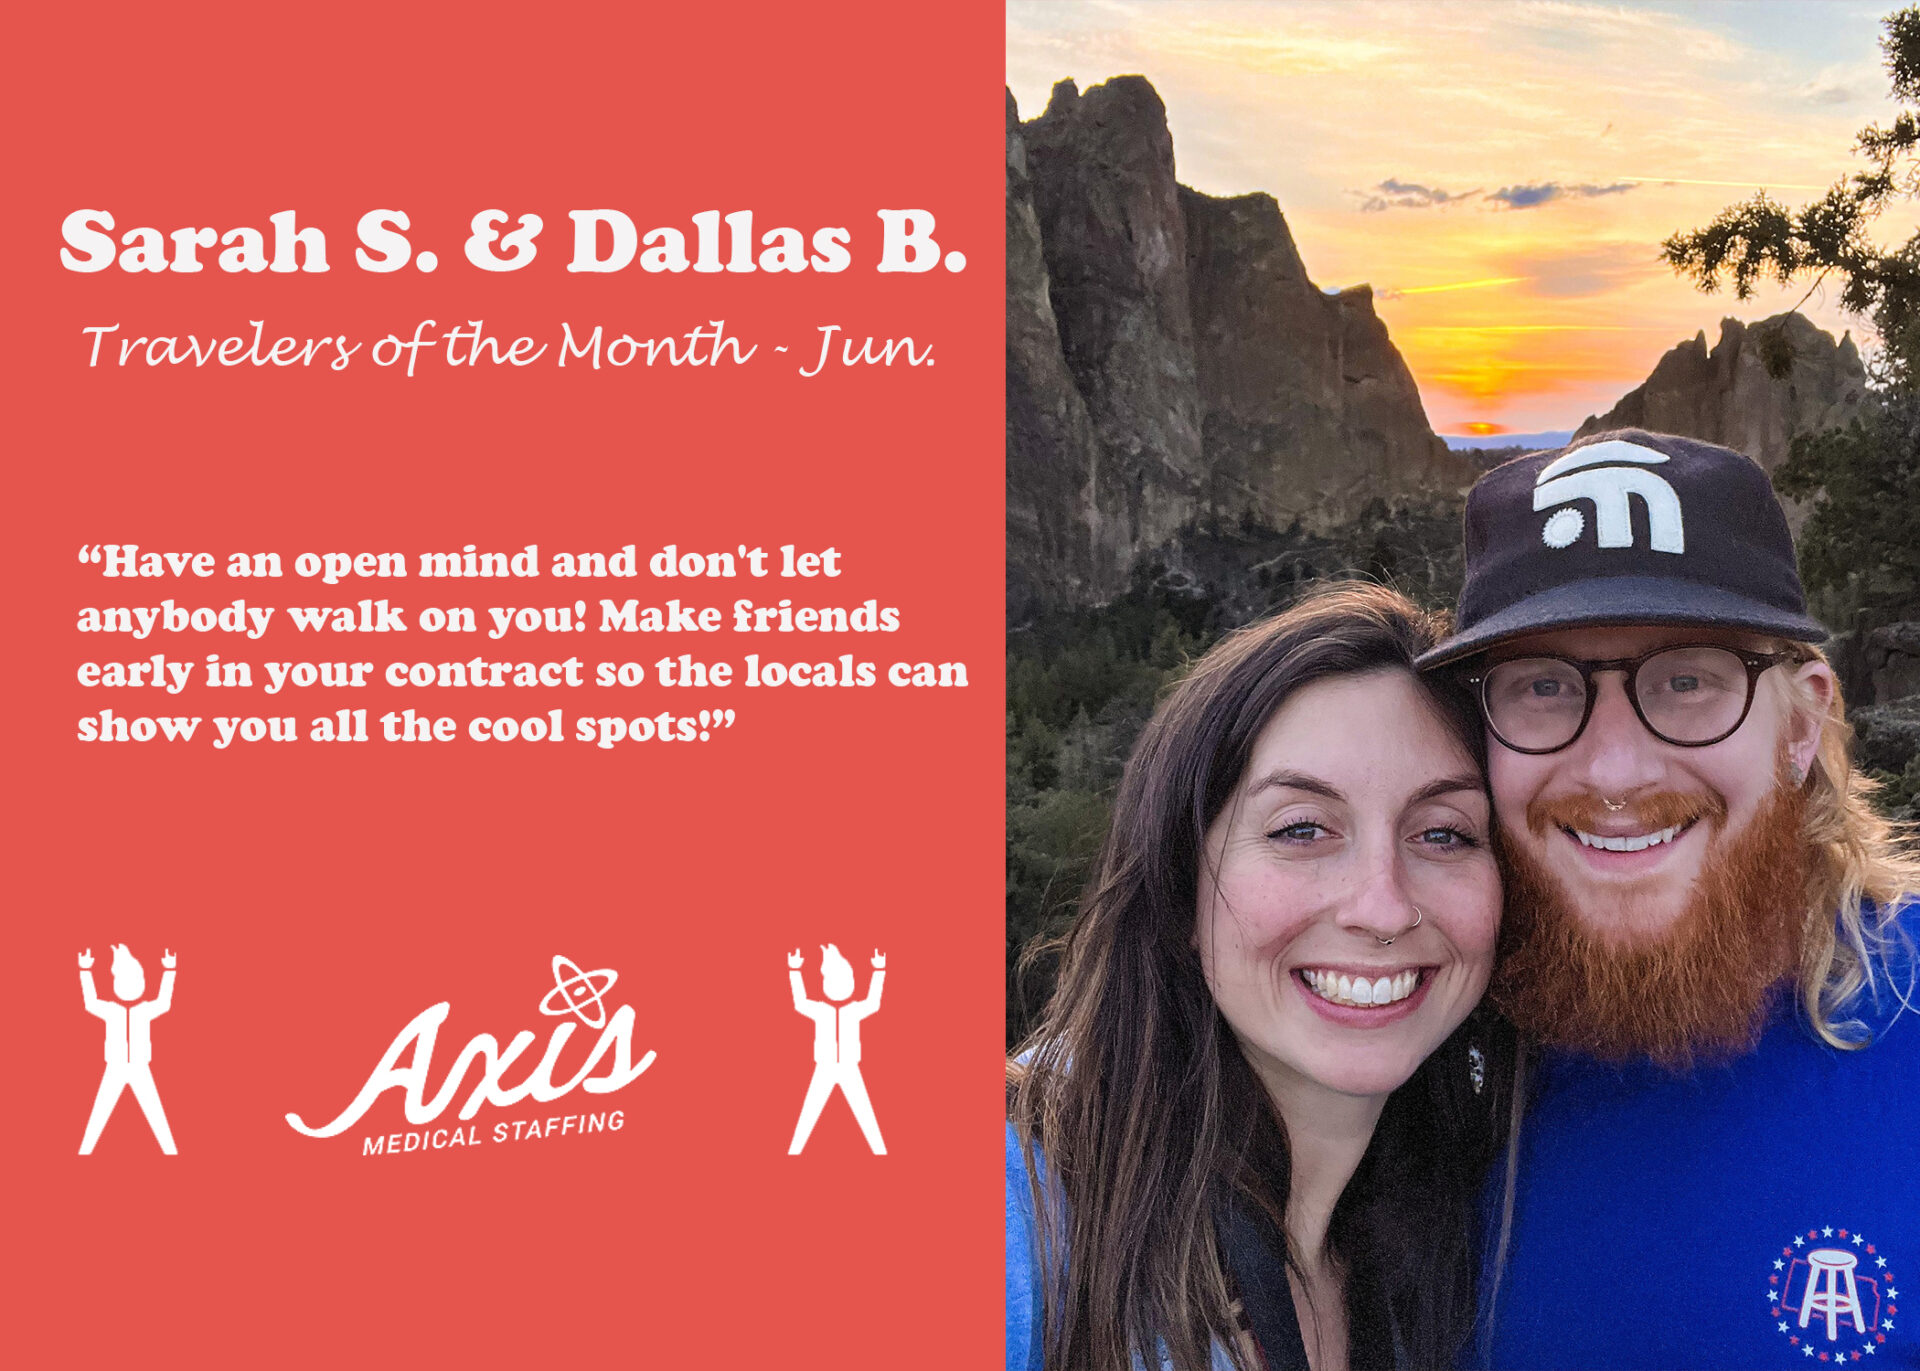 Travelers of the Month: Sarah S. & Dallas B!